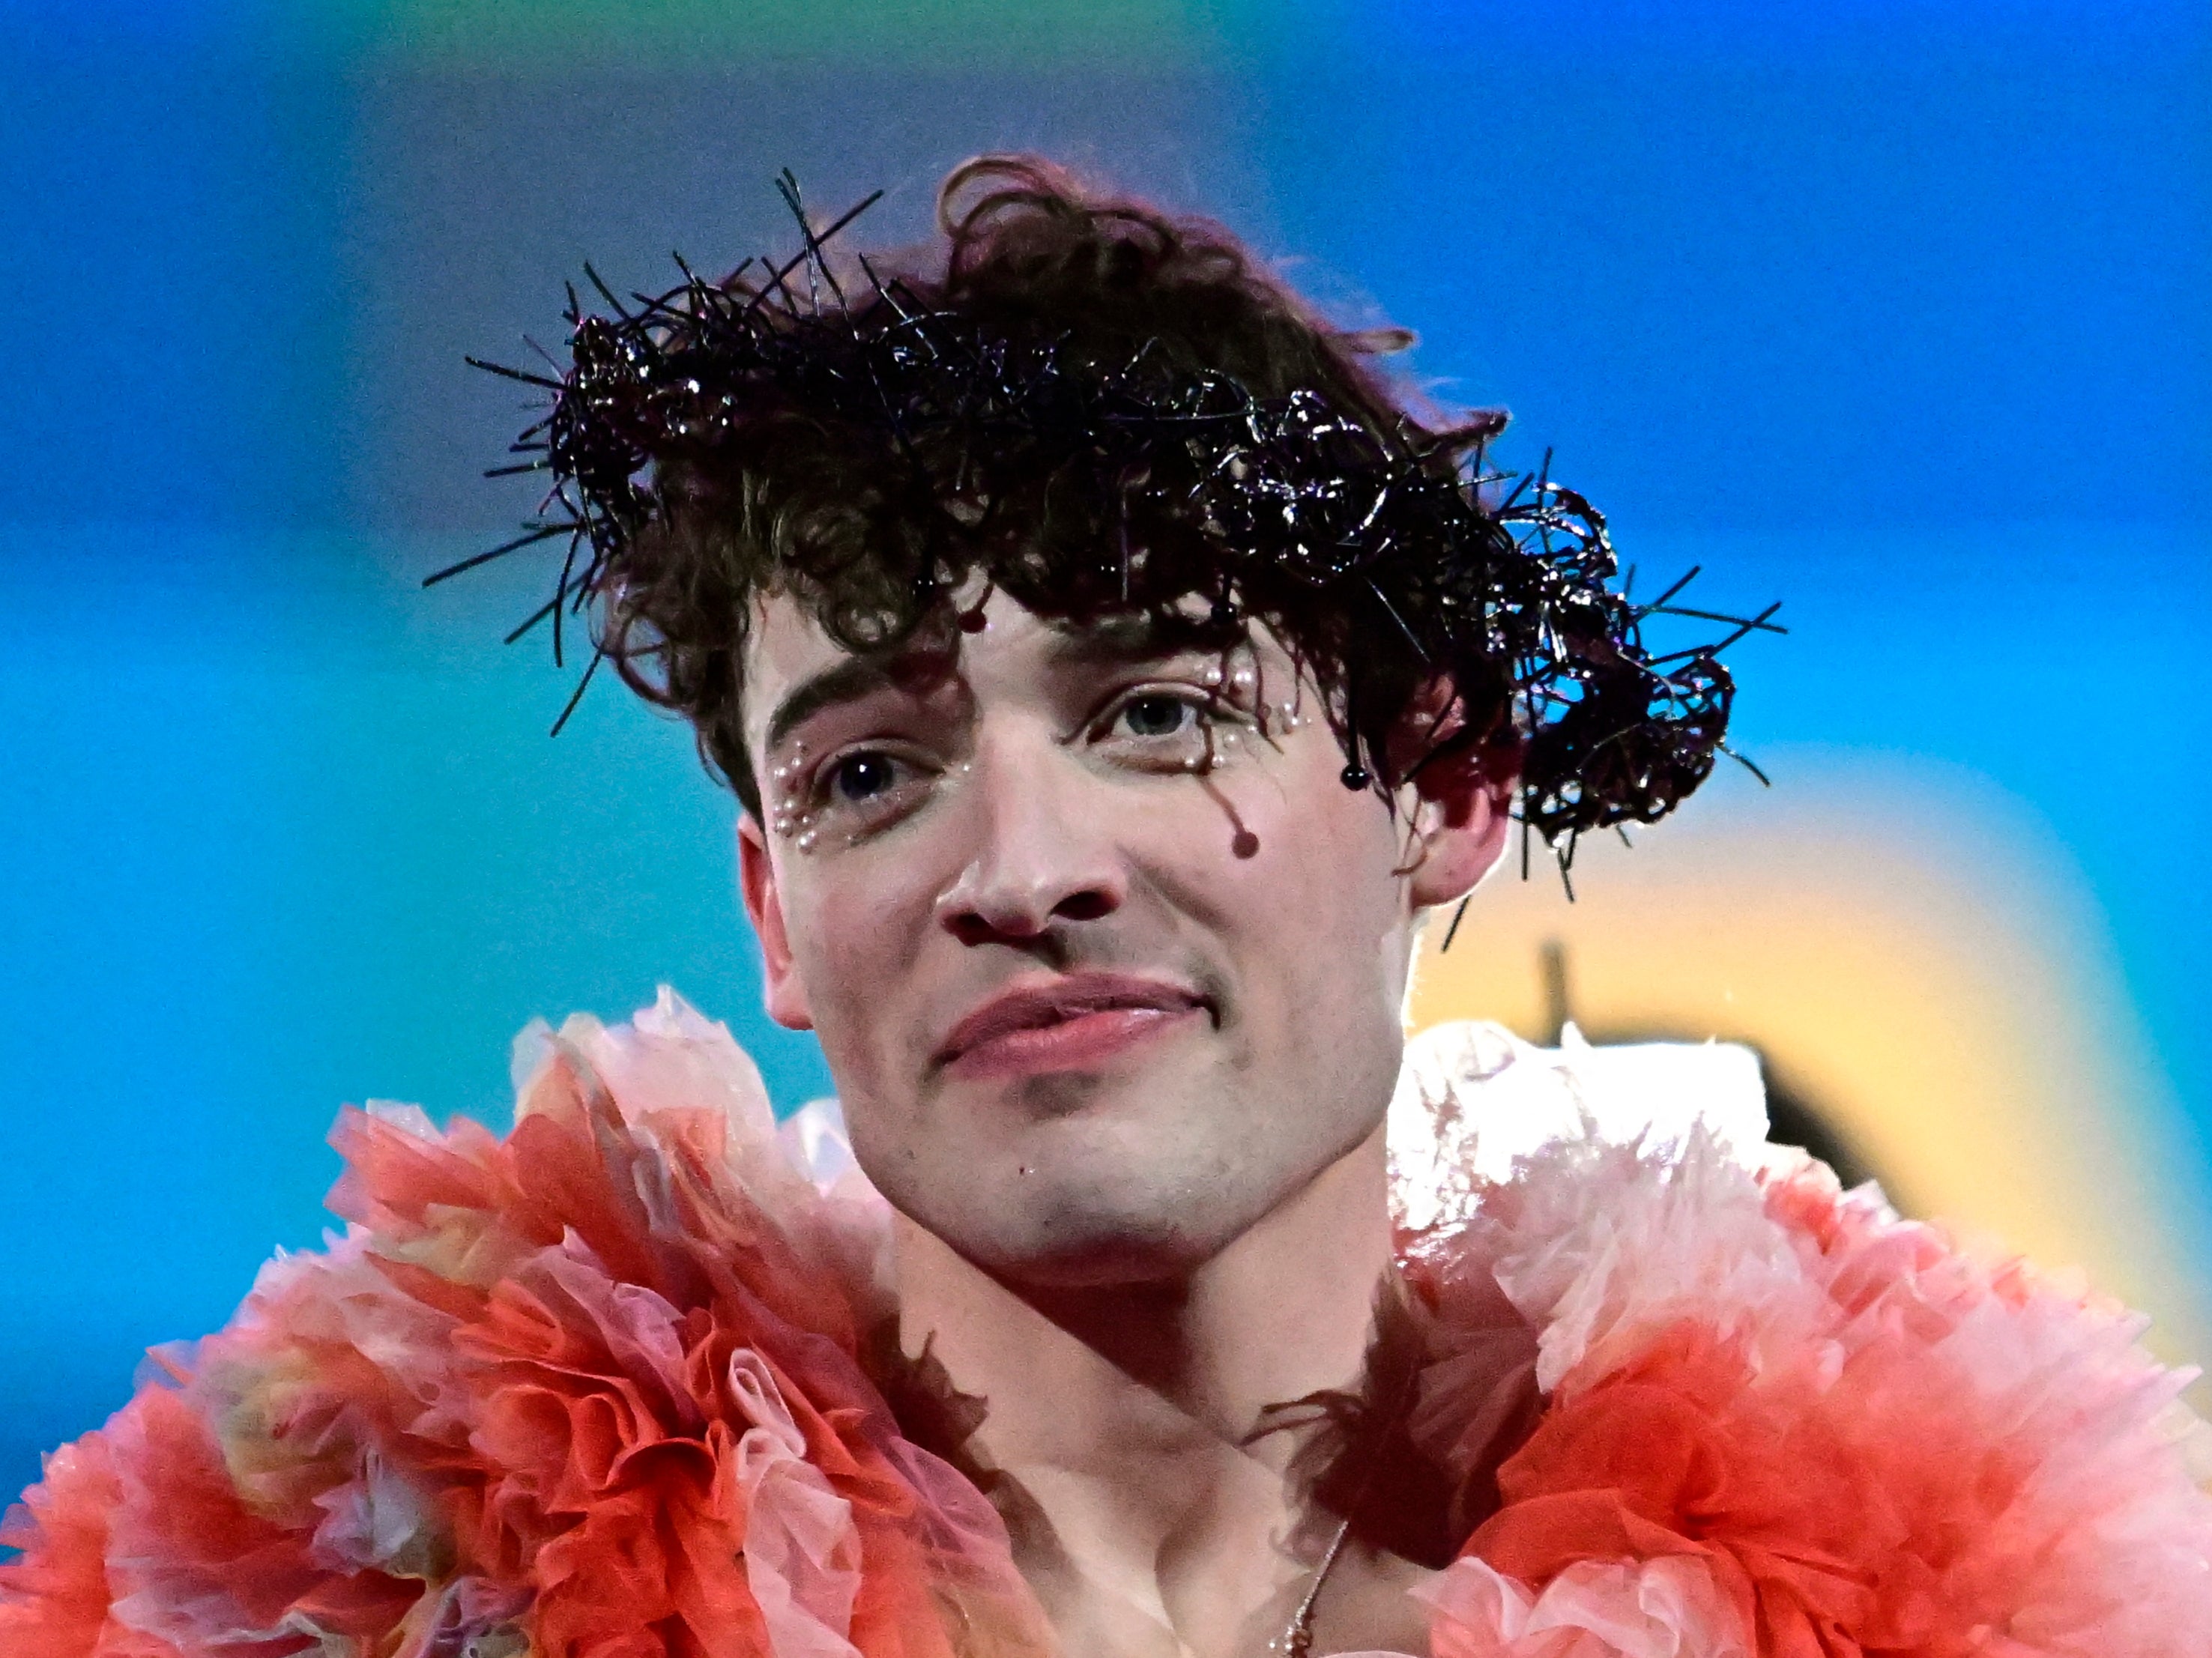 Nemo onstage at the Eurovision Song Contest final